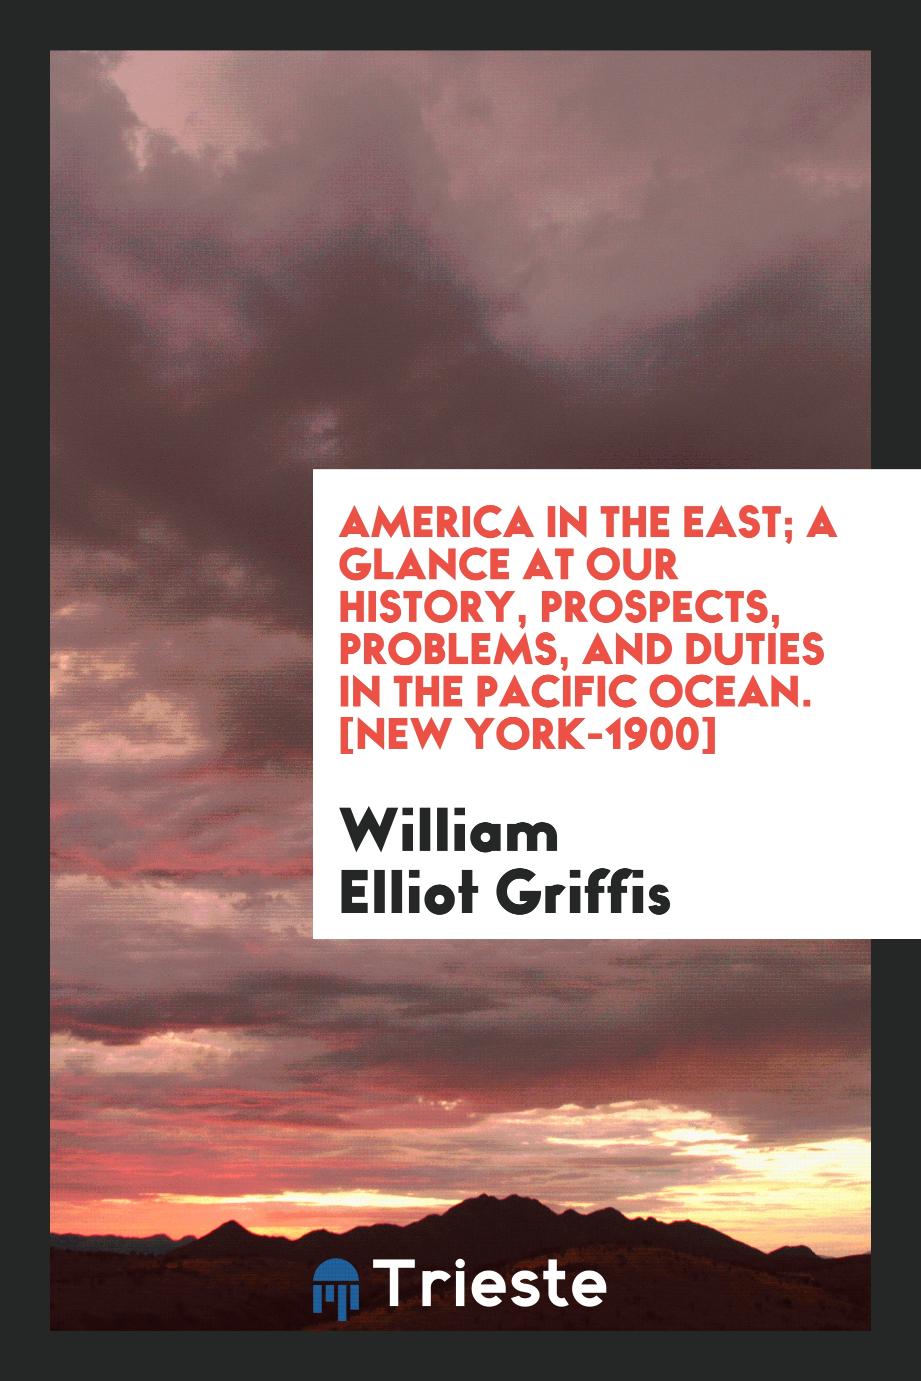 America in the East; A Glance at Our History, Prospects, Problems, and Duties in the Pacific Ocean. [New York-1900]